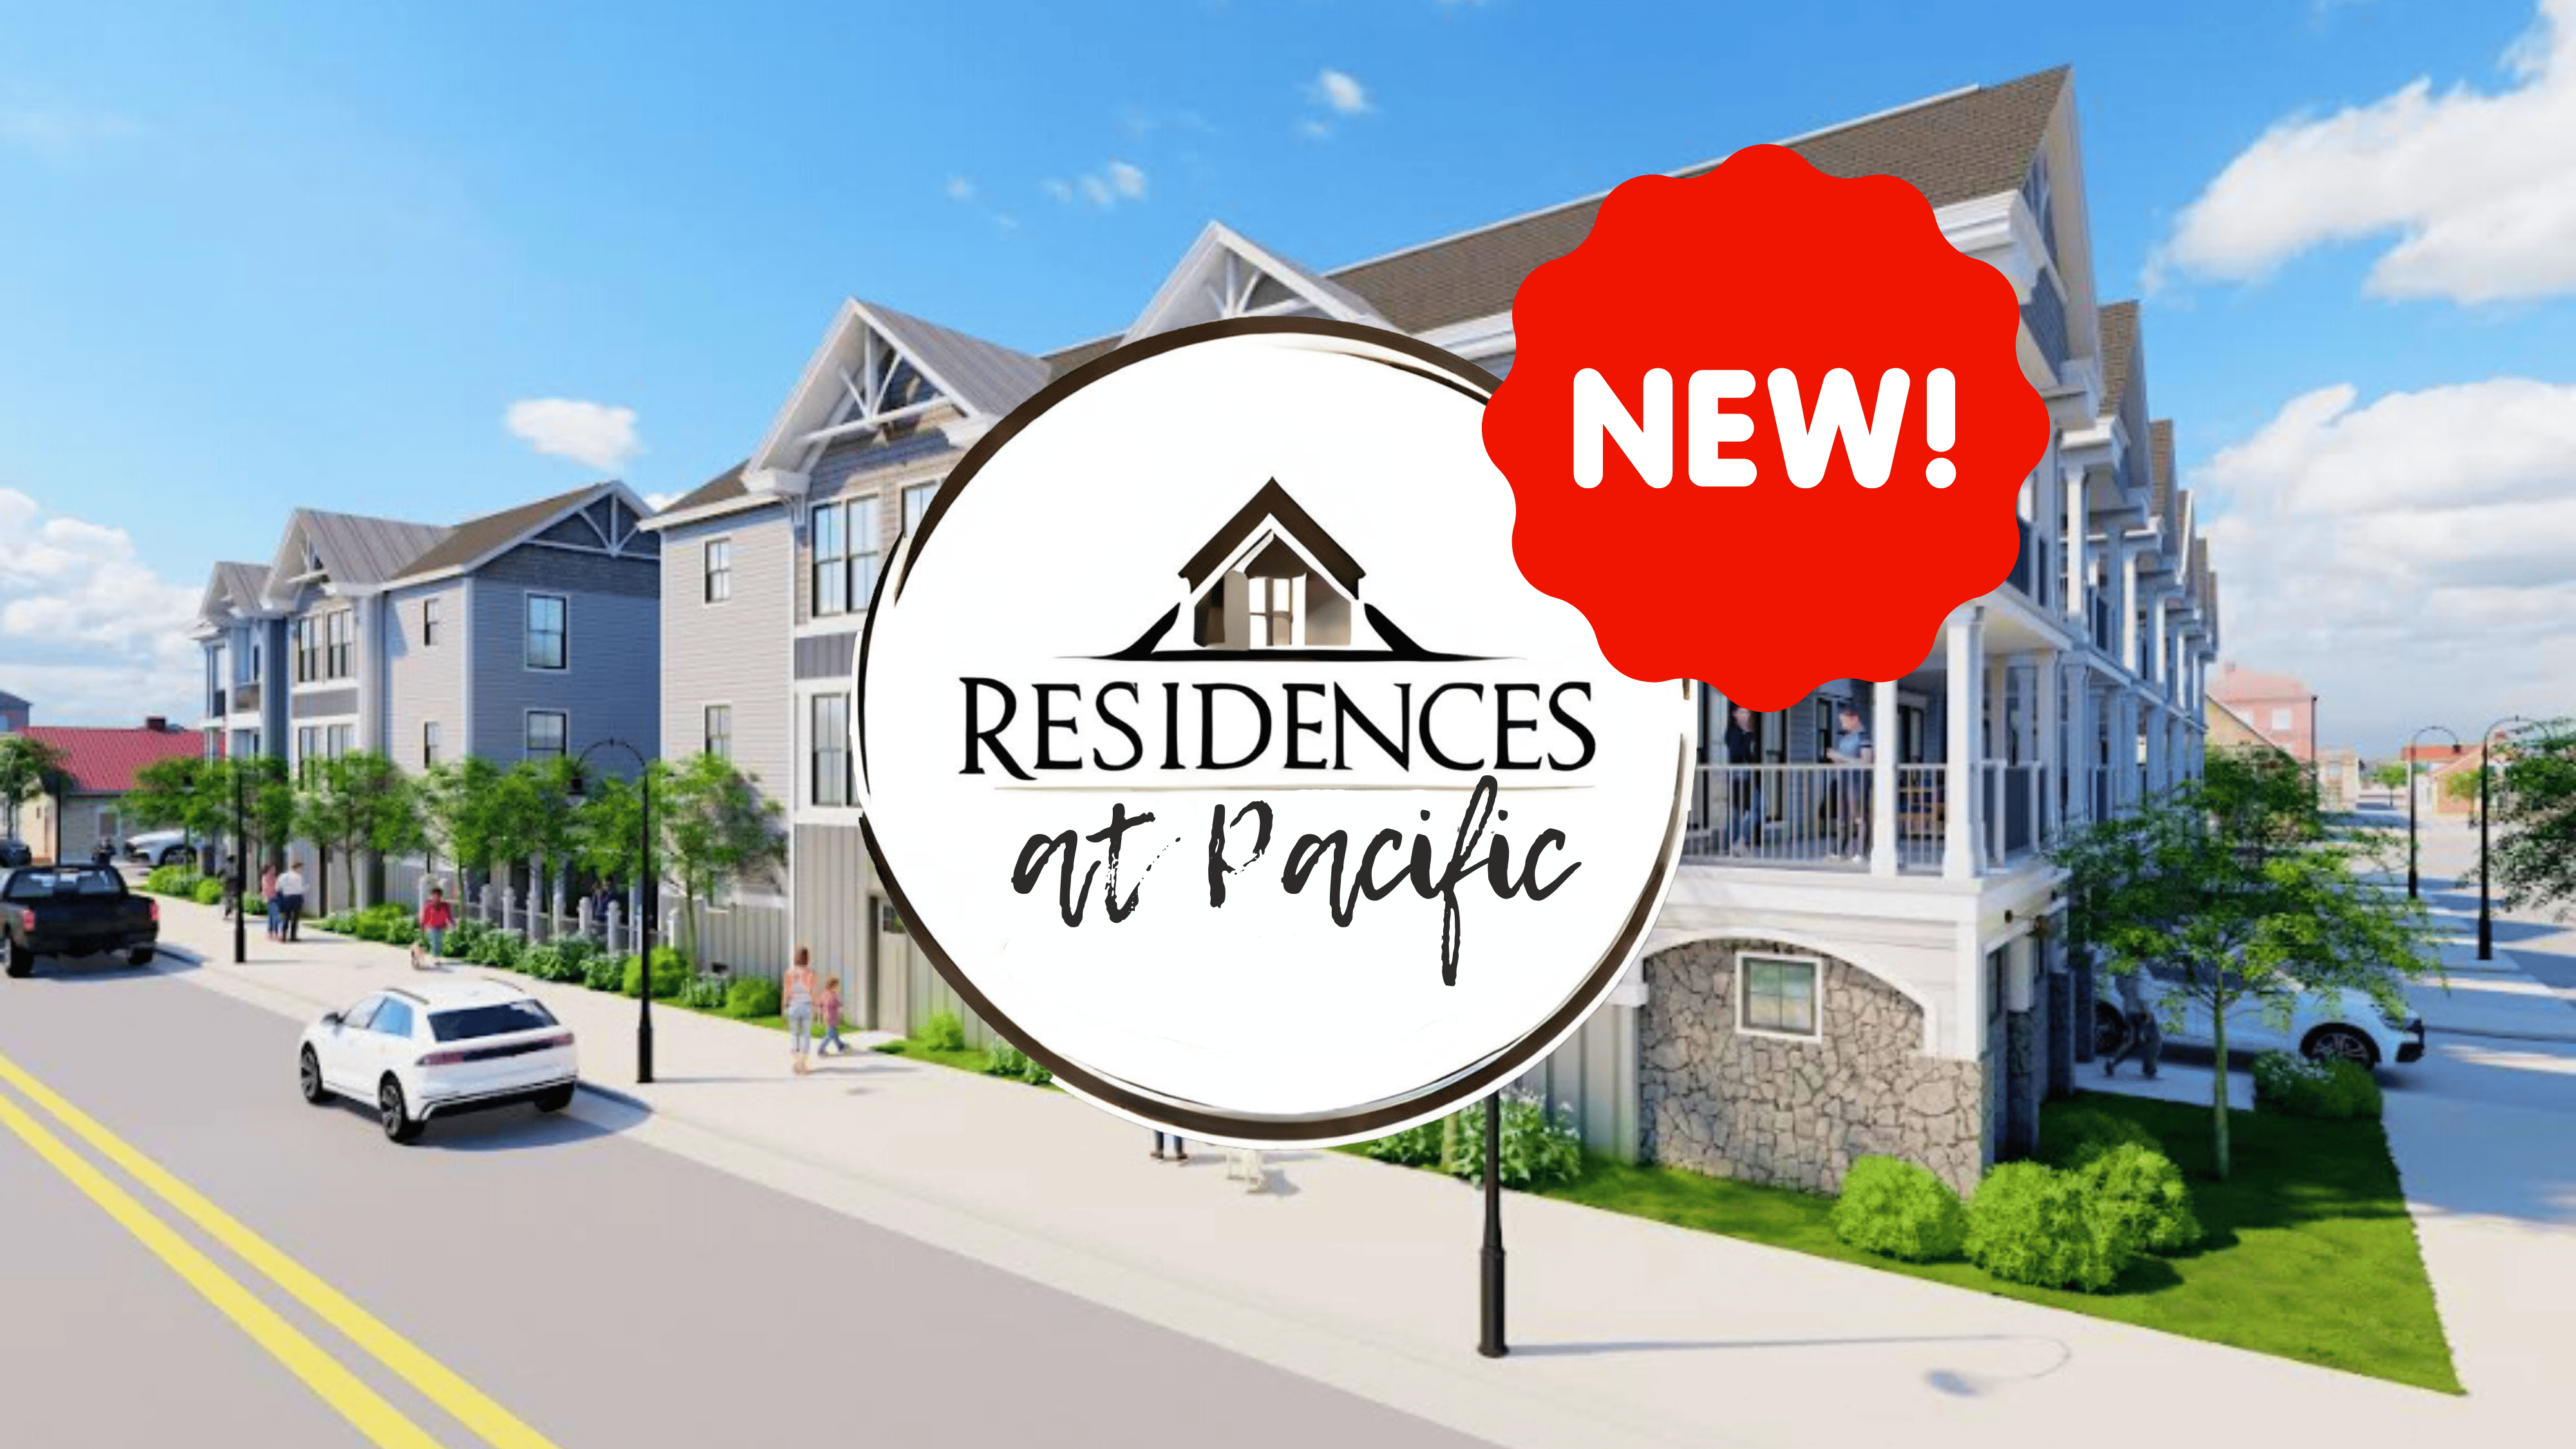 NEW - The Residences at Pacific